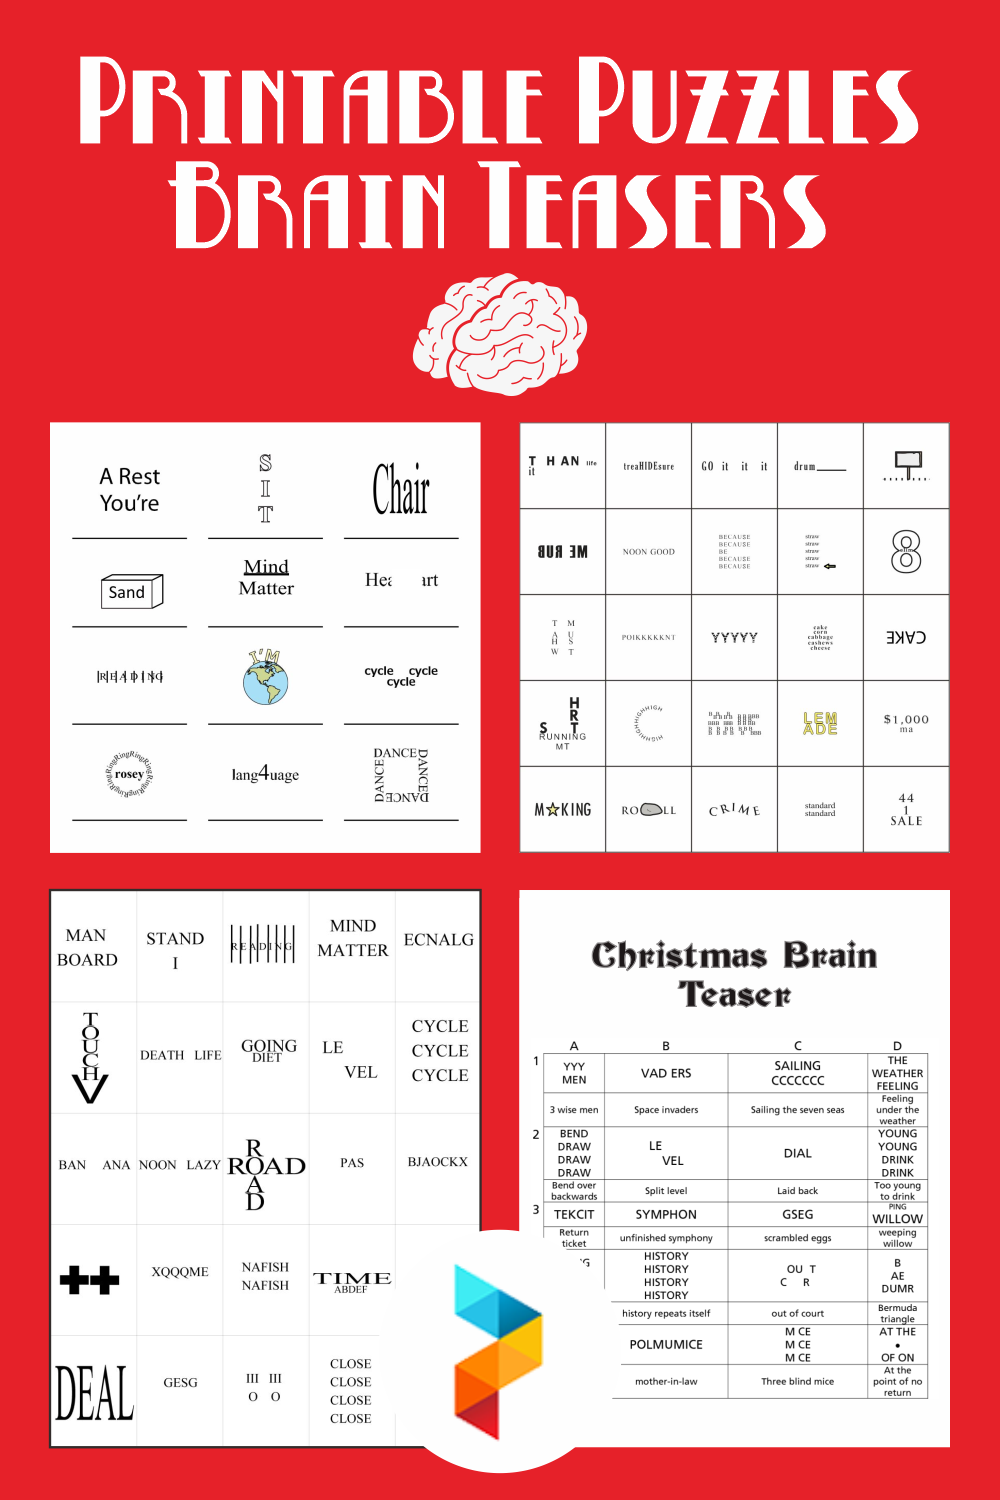 Printable Puzzles Brain Teasers